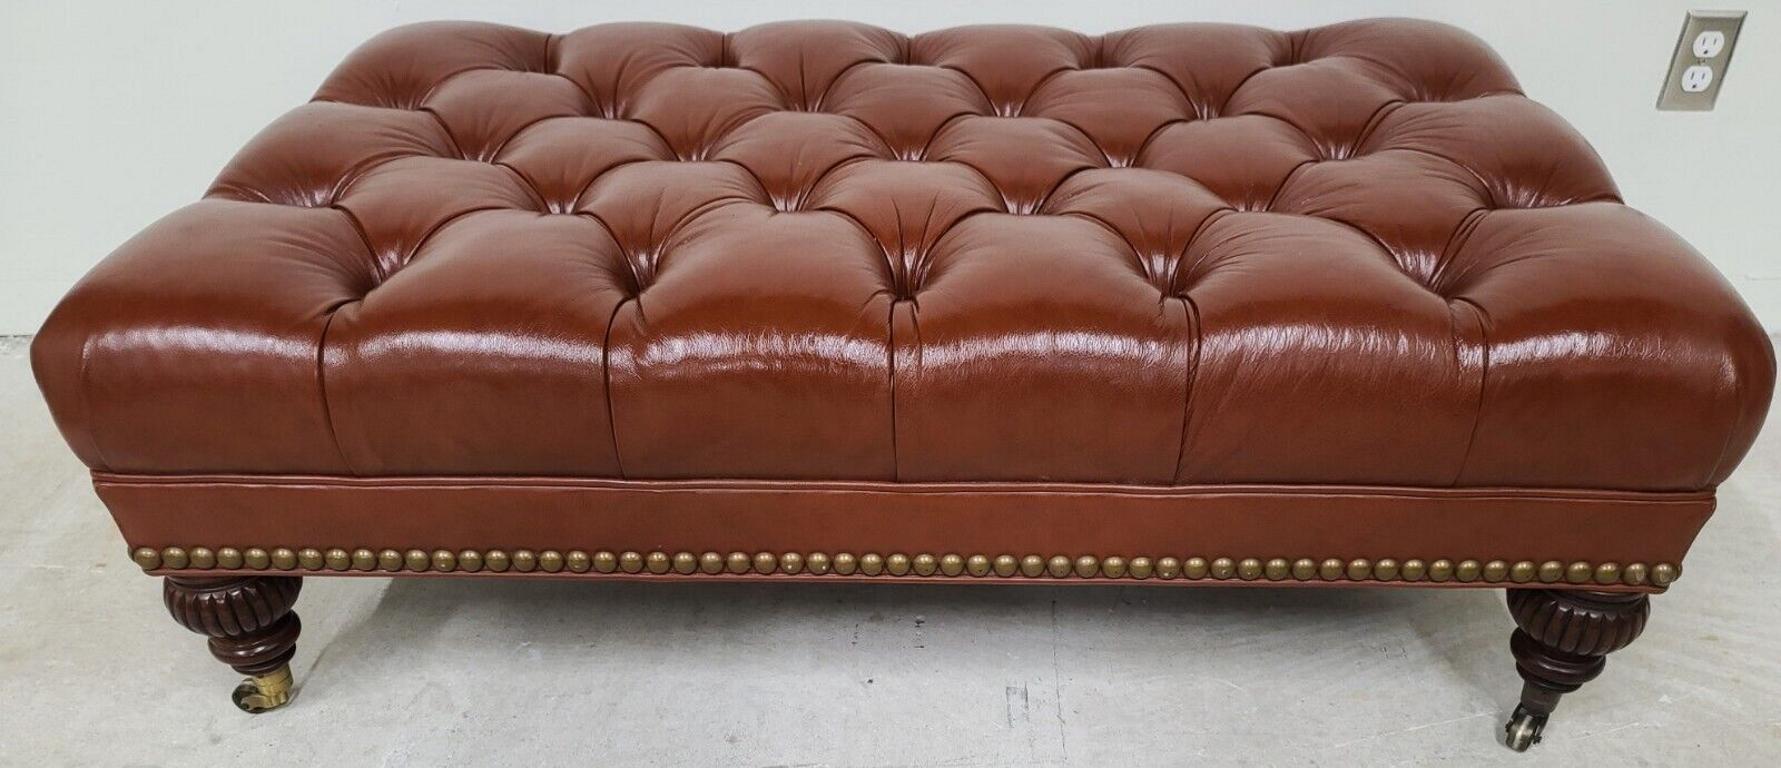 20th Century Oversized Leather Rolling Biscuit Tufted Ottoman Cocktail Table